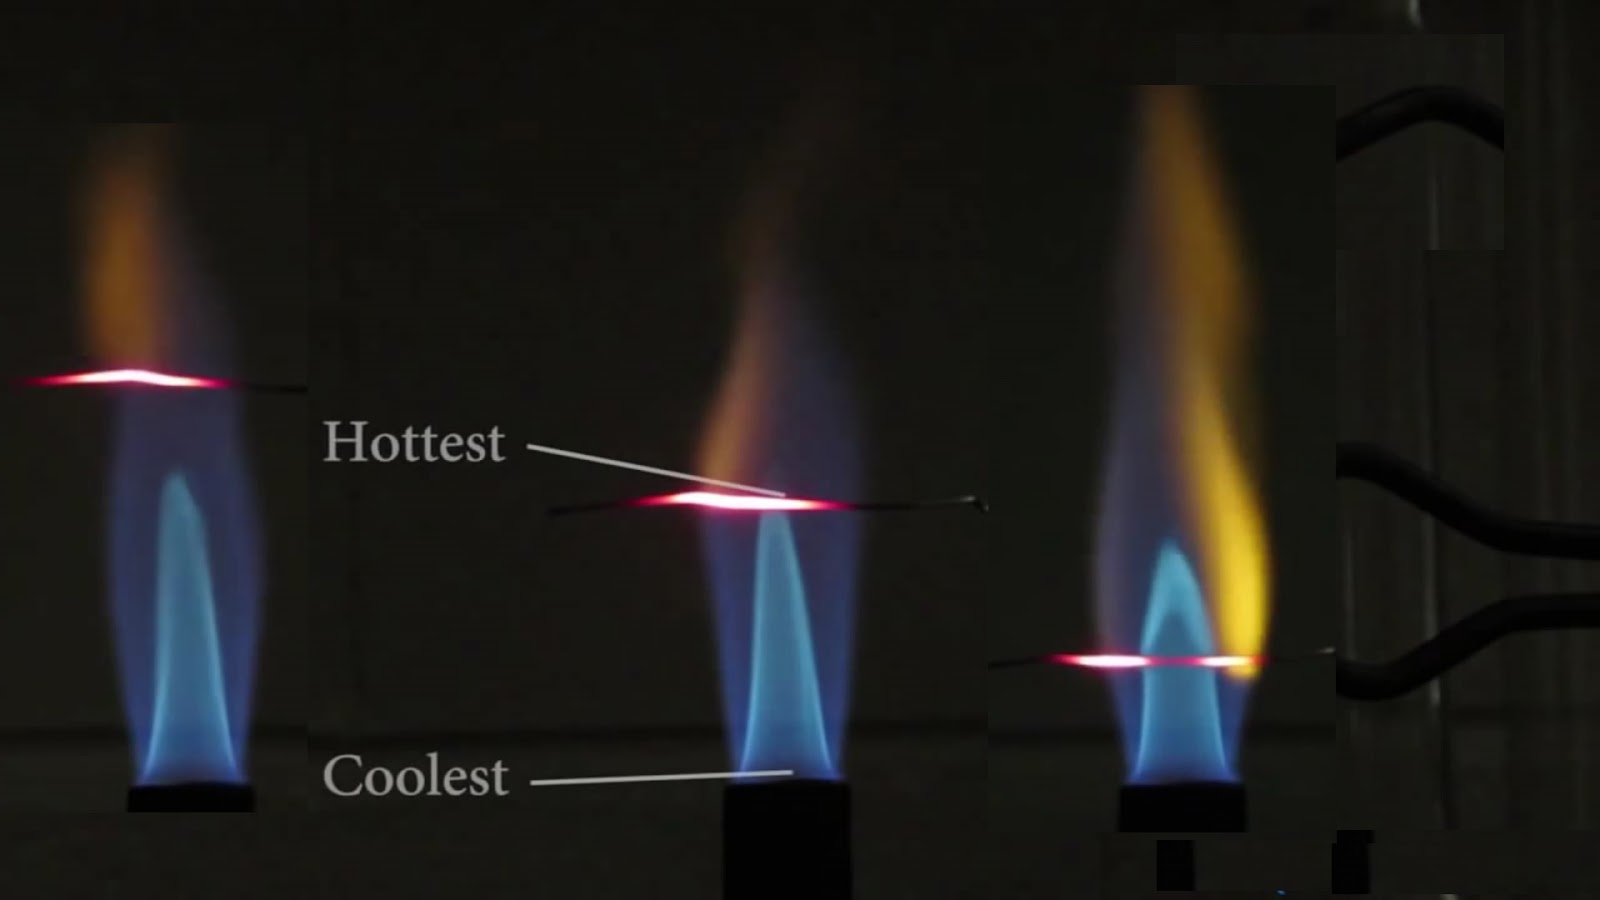 How Hot Is A Campfire? Find Out Temperature Of Fire